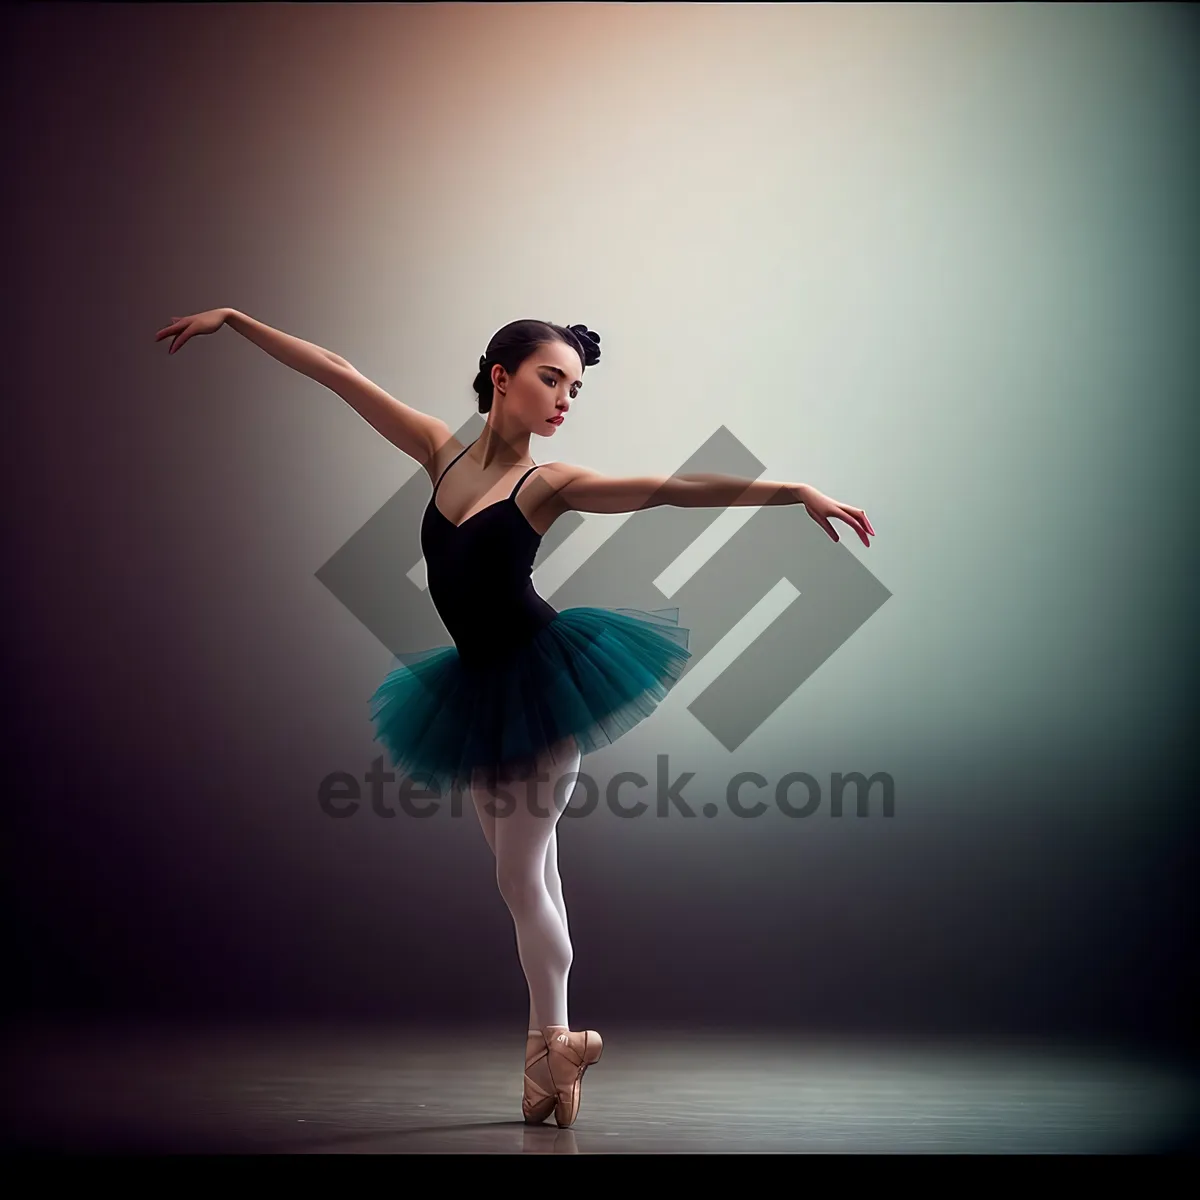 Picture of Vibrant Dancer in Mid-Air- Capturing Effortless Grace